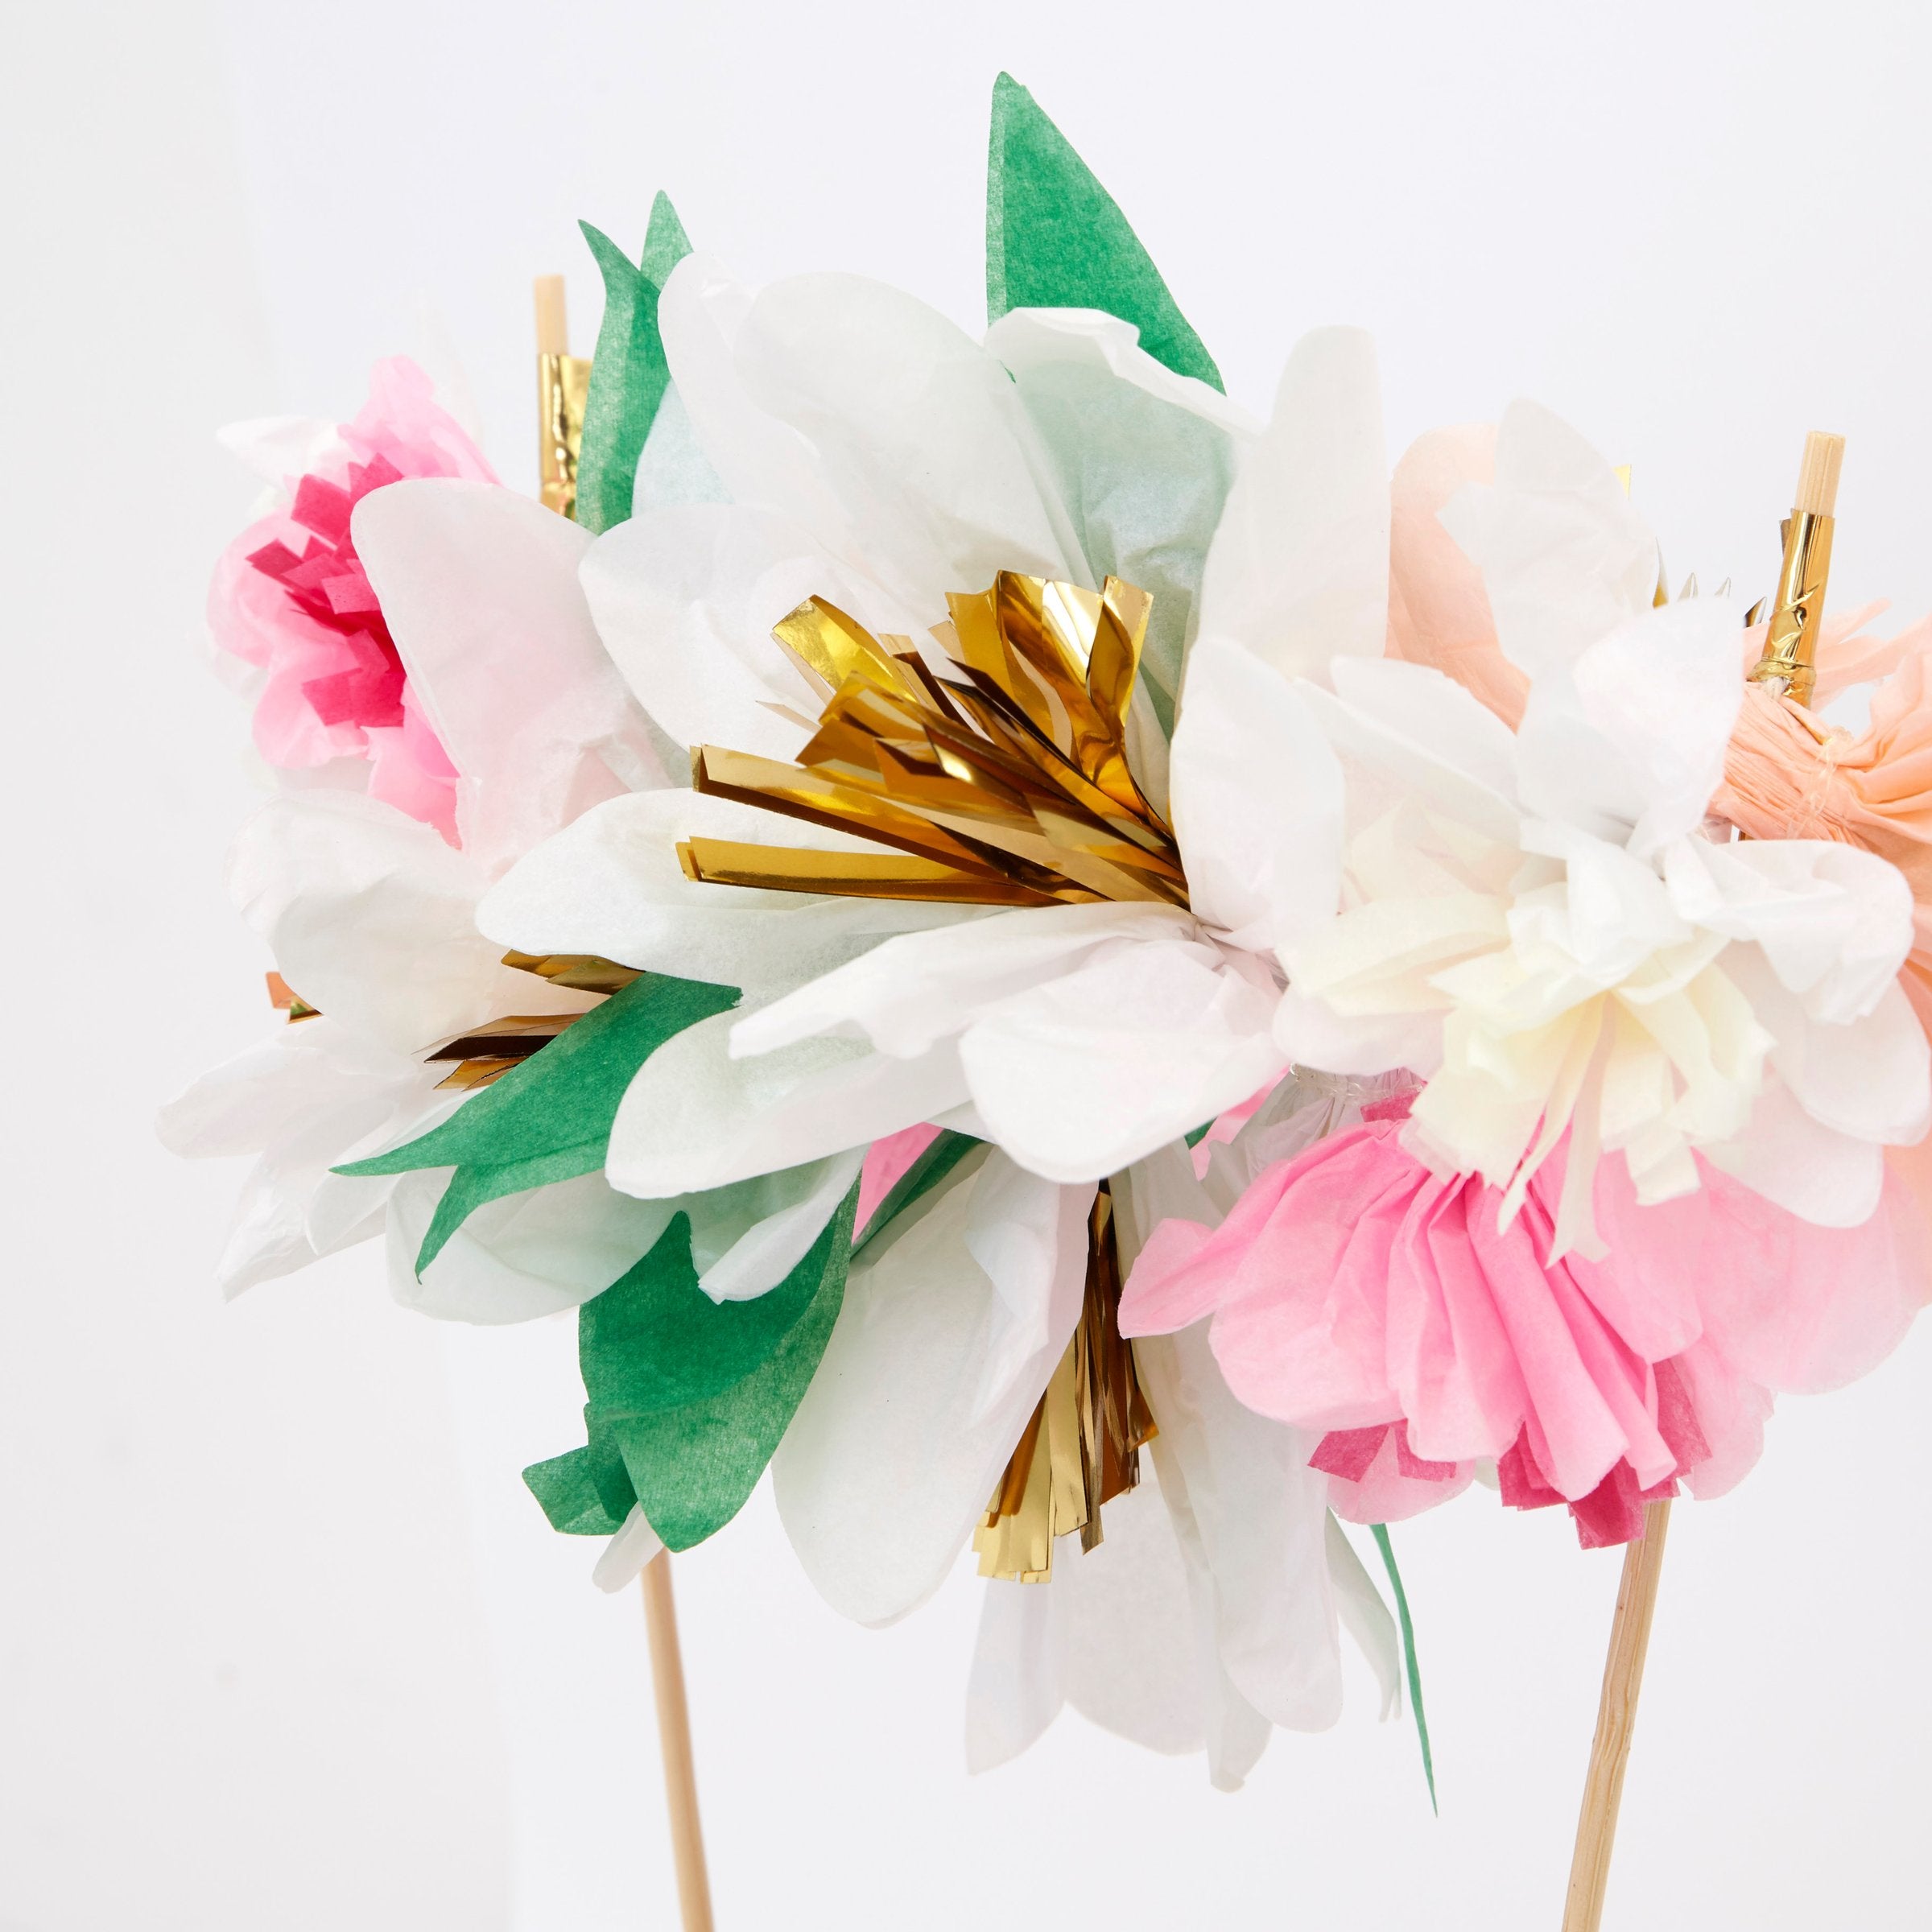 Turn a celebratory cake into a beautiful floral work of art with our fabulous cake topper crafted with colorful paper flowers.